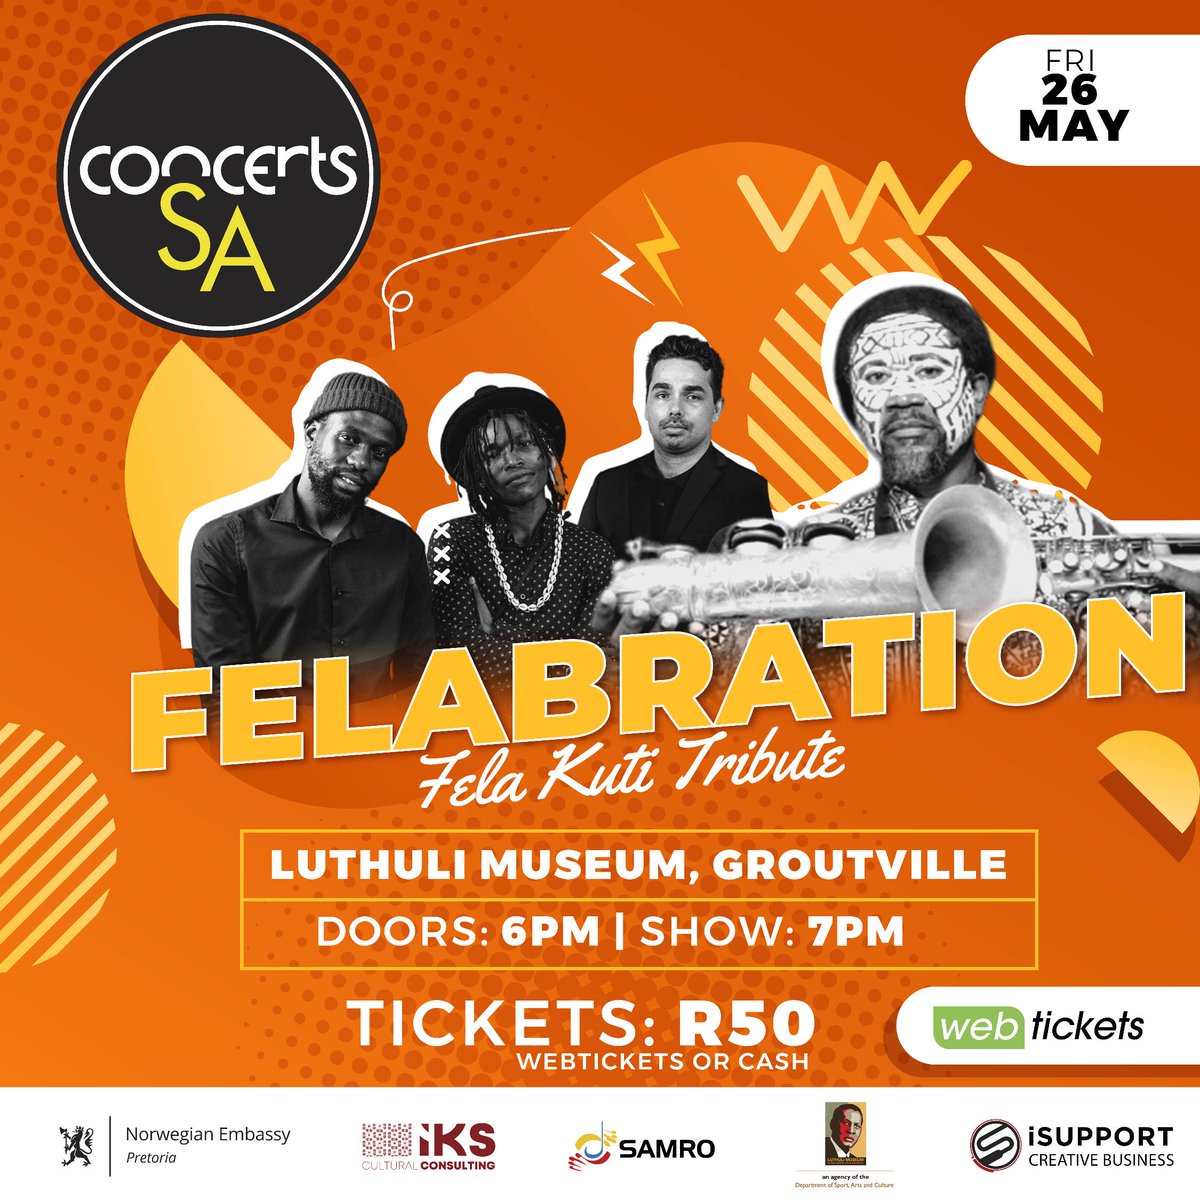 This Africa Month, iSupport Creative Business and Luthuli Museum, supported by Concerts SA, are presenting a tribute to the late Nigerian musician and activist Fela Kuti. 
 
#weLOVEliveMUSIC #Felabration  #FelaKutiTribute  #LiveMusicConcert